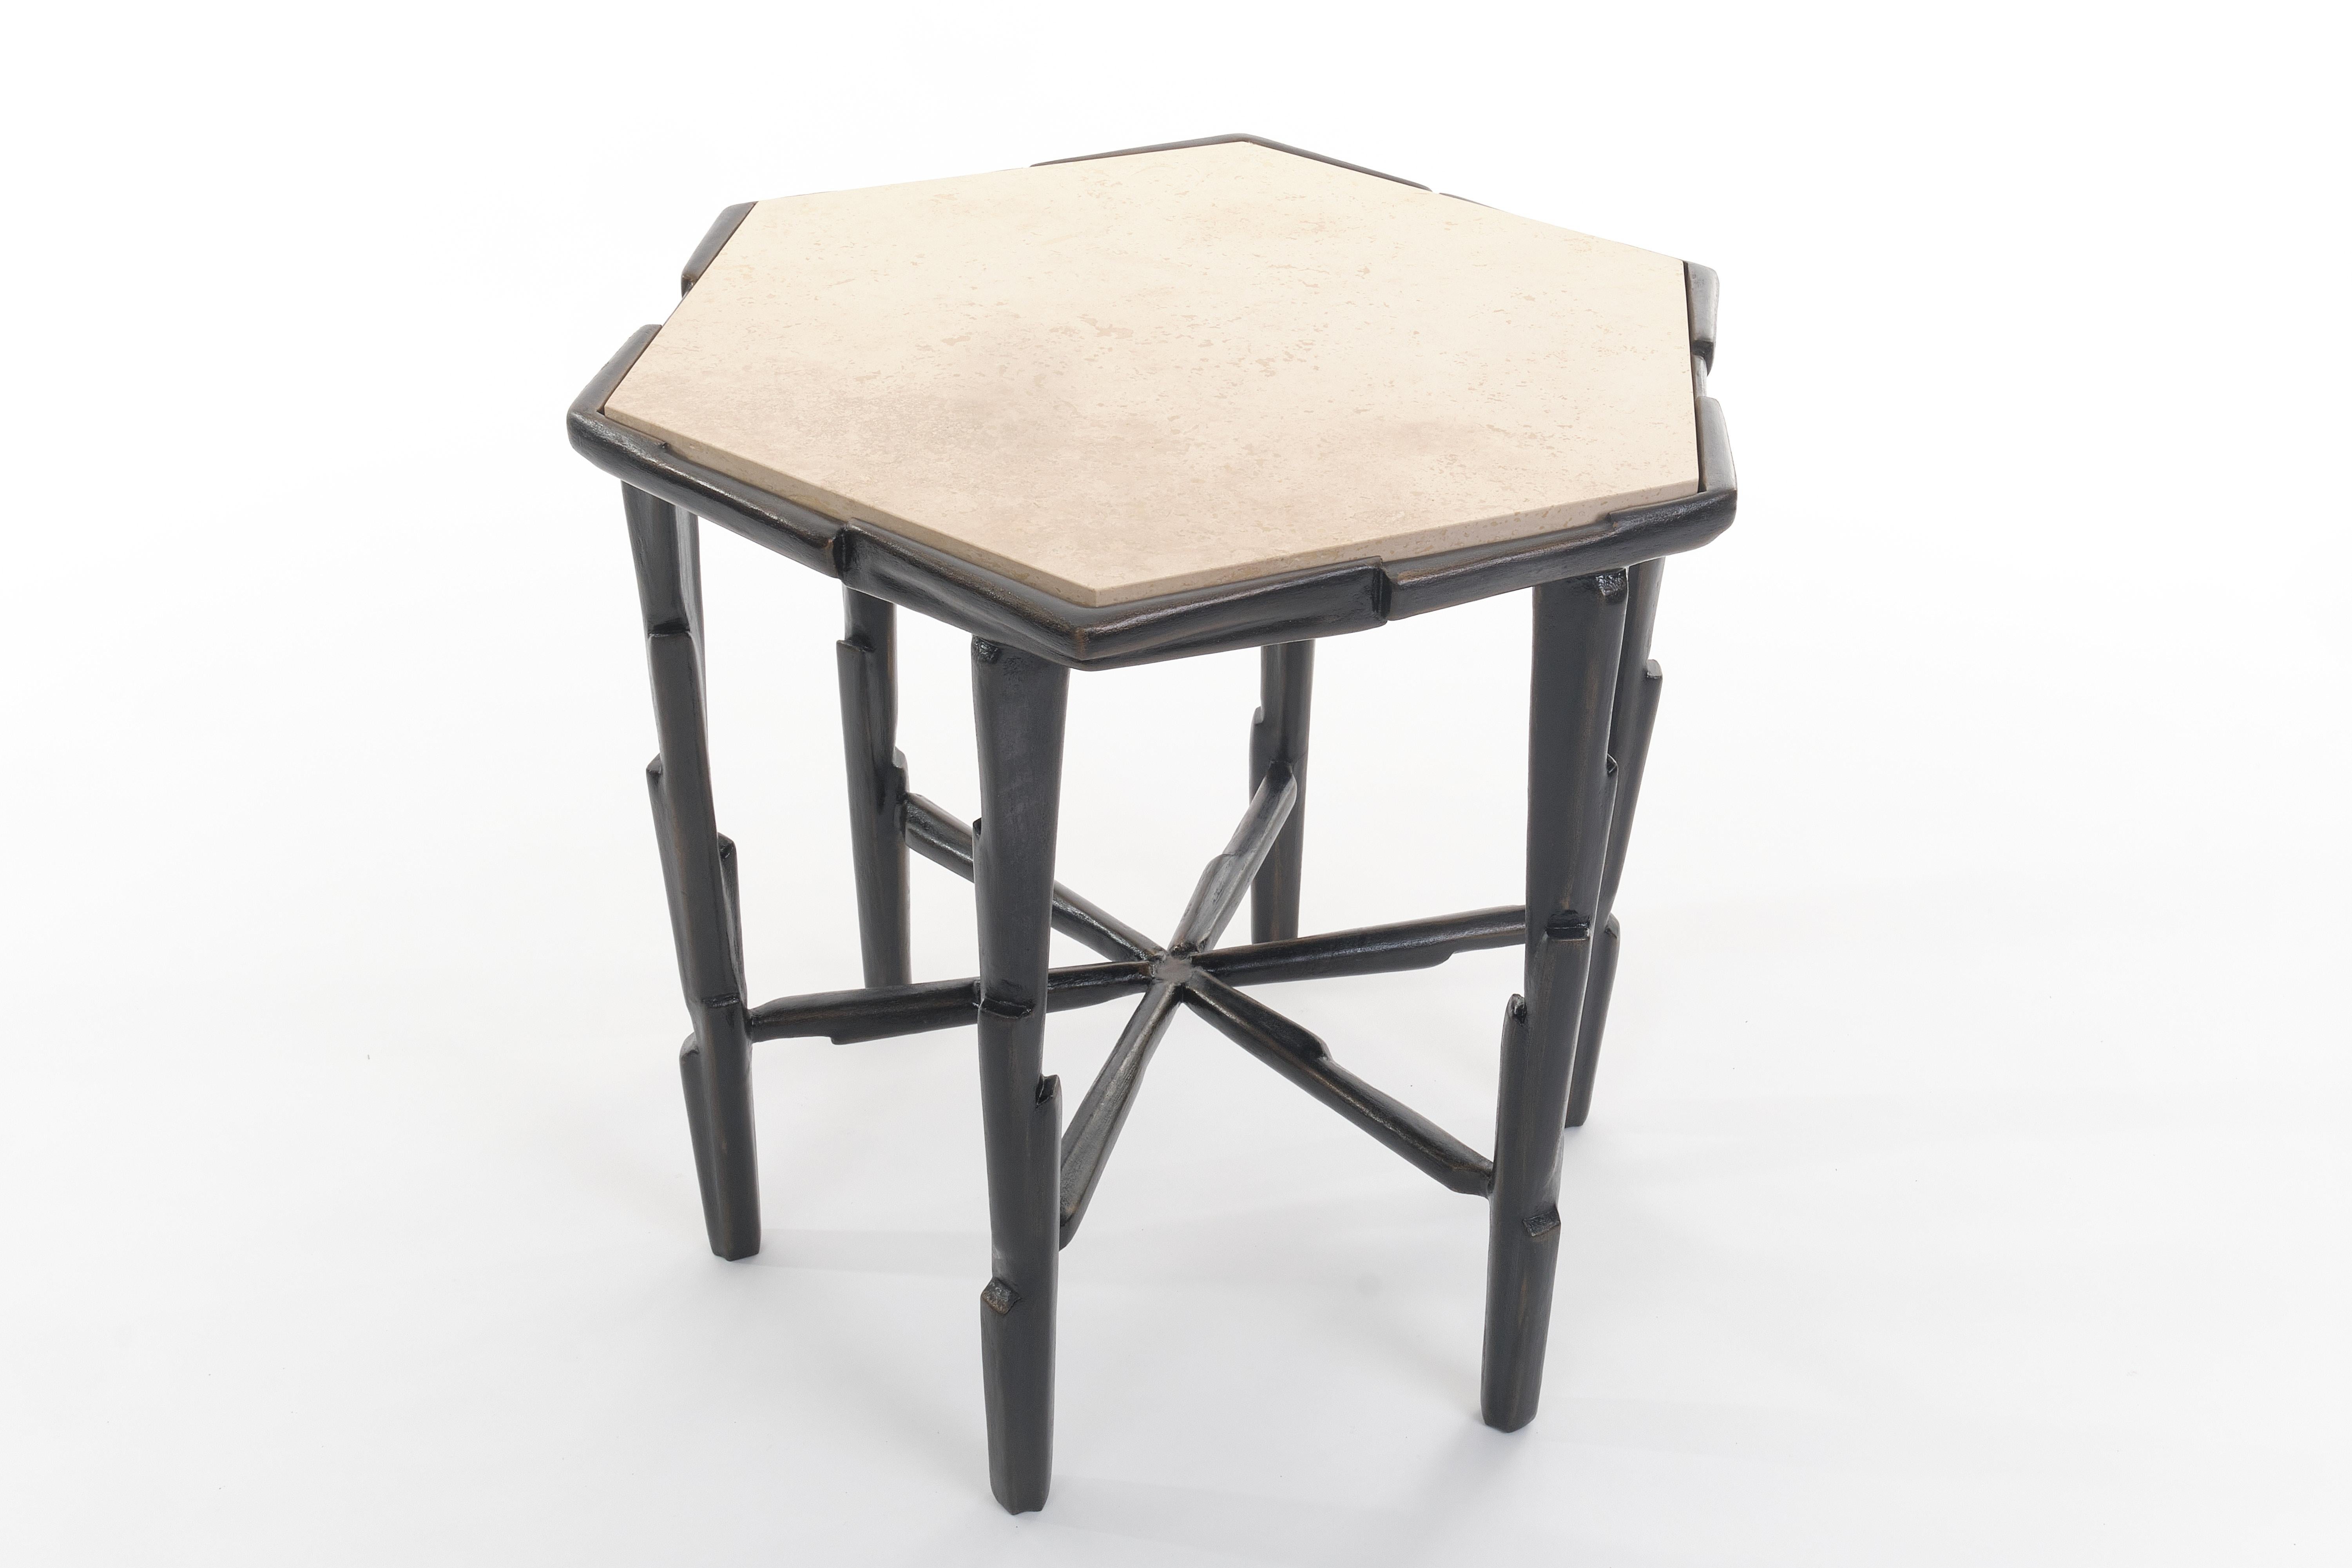 The LINEA side table has a strong and dynamic silhouette. Geometric composition based on the figure of the triangle. Base of plaster over iron. The piece of furniture is crowned by a travertine top. The stone is set in a hand sculpted frame. The